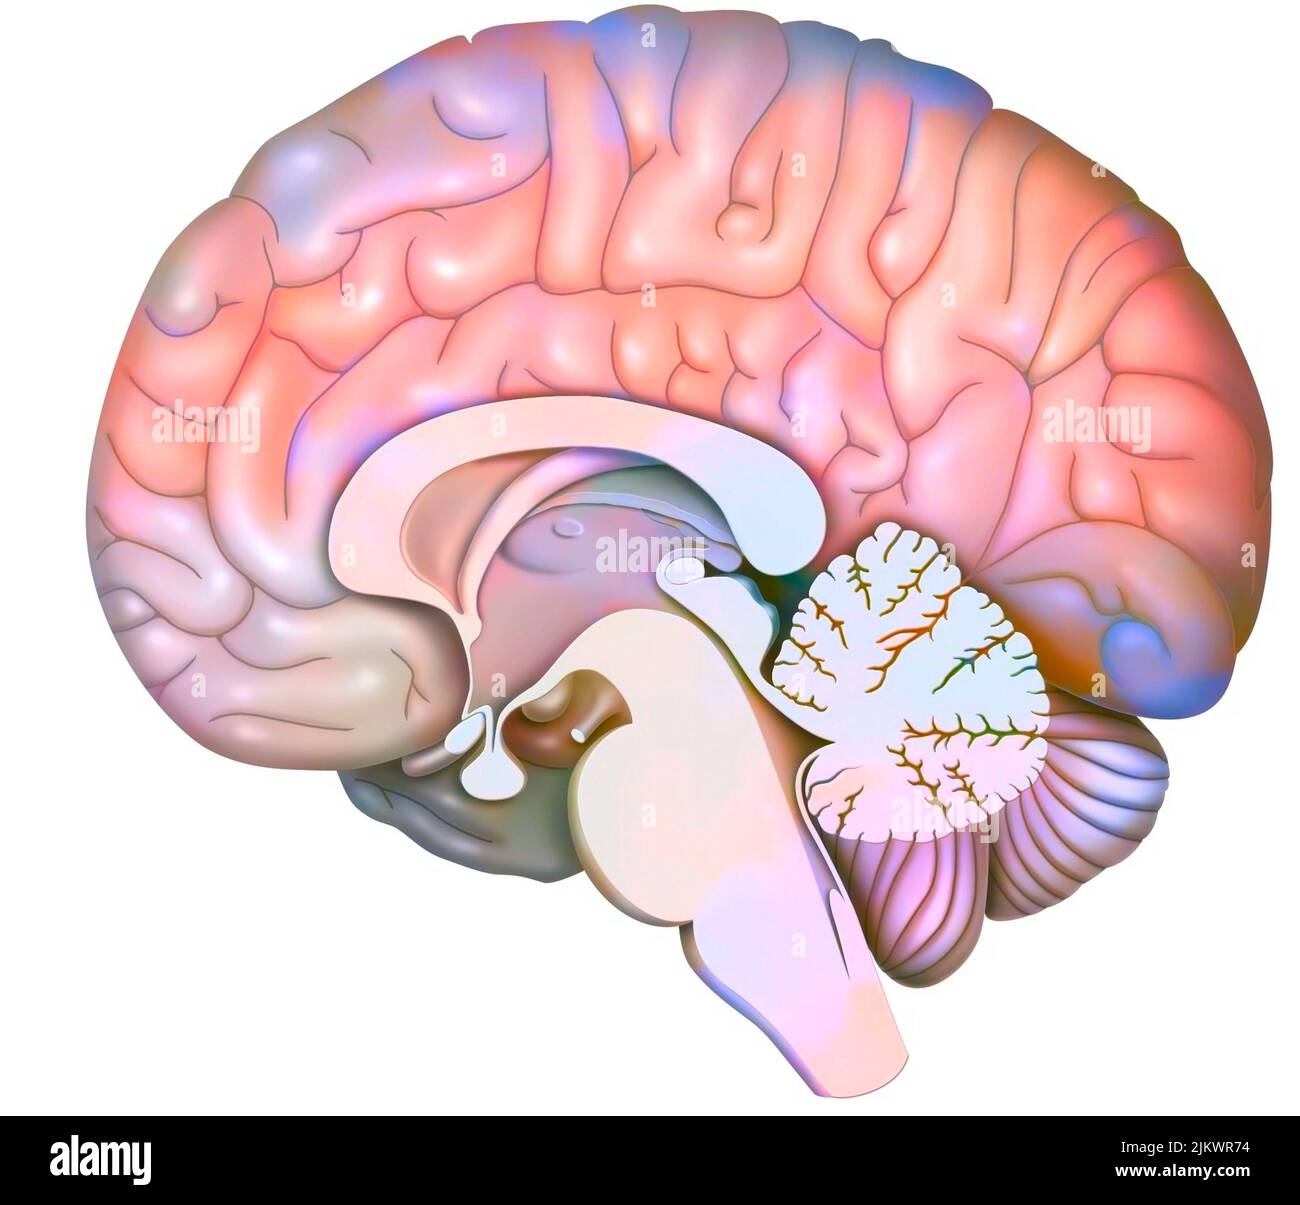 Median sagittal section of the brain with cerebellum and beginning of the brainstem. Stock Photo